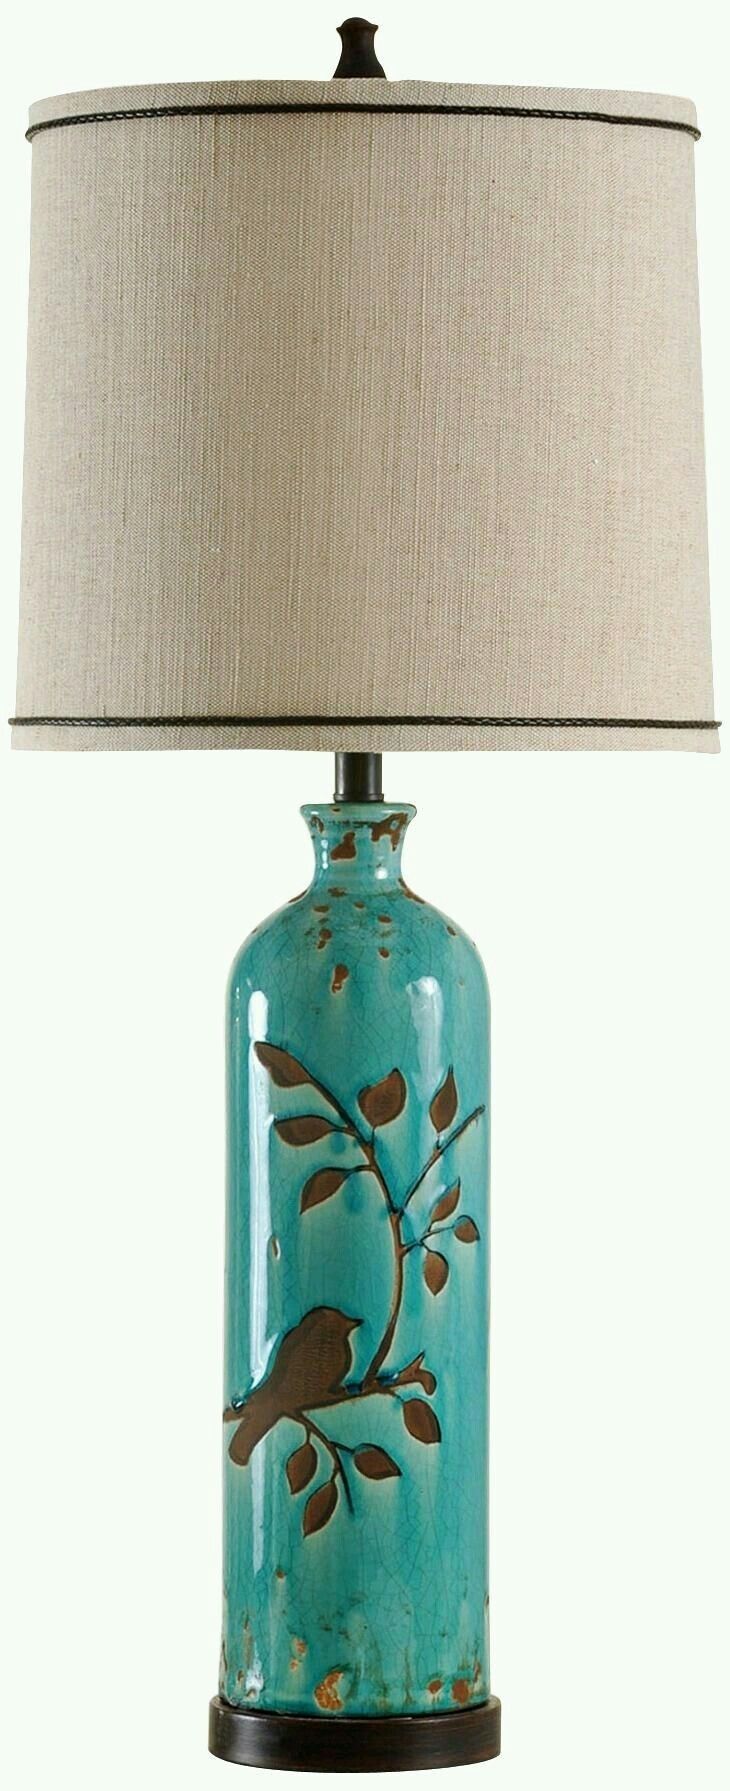 Pinguzin Oz On Iki | Pinterest | Pottery Ideas, Pottery And Regarding Ceramic Living Room Table Lamps (View 8 of 15)